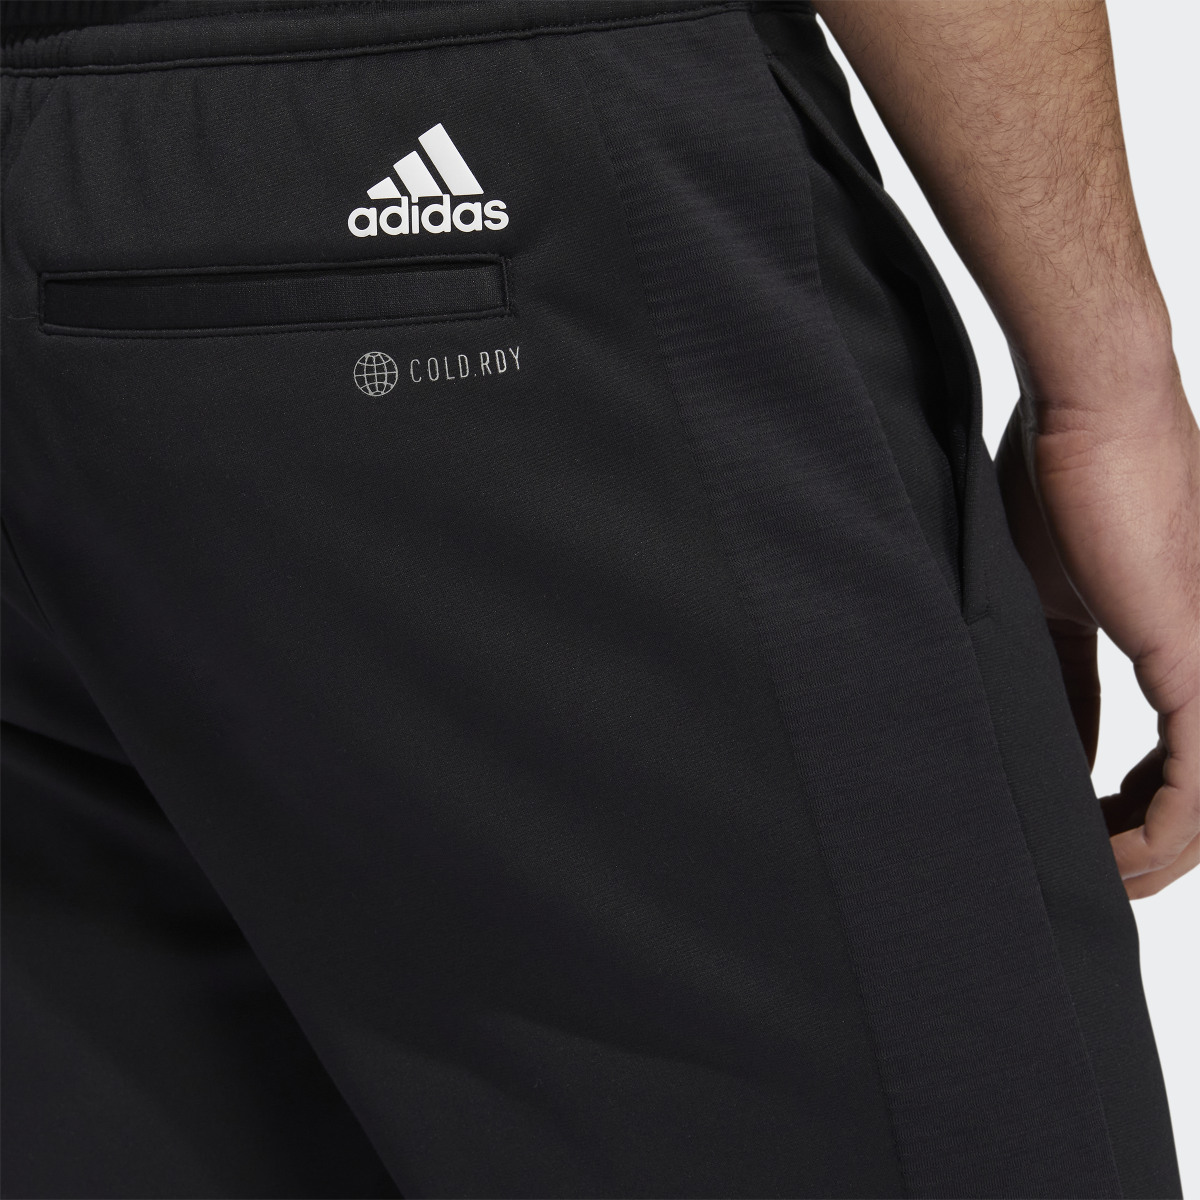 Adidas COLD.RDY Jogger Tracksuit Bottoms. 6